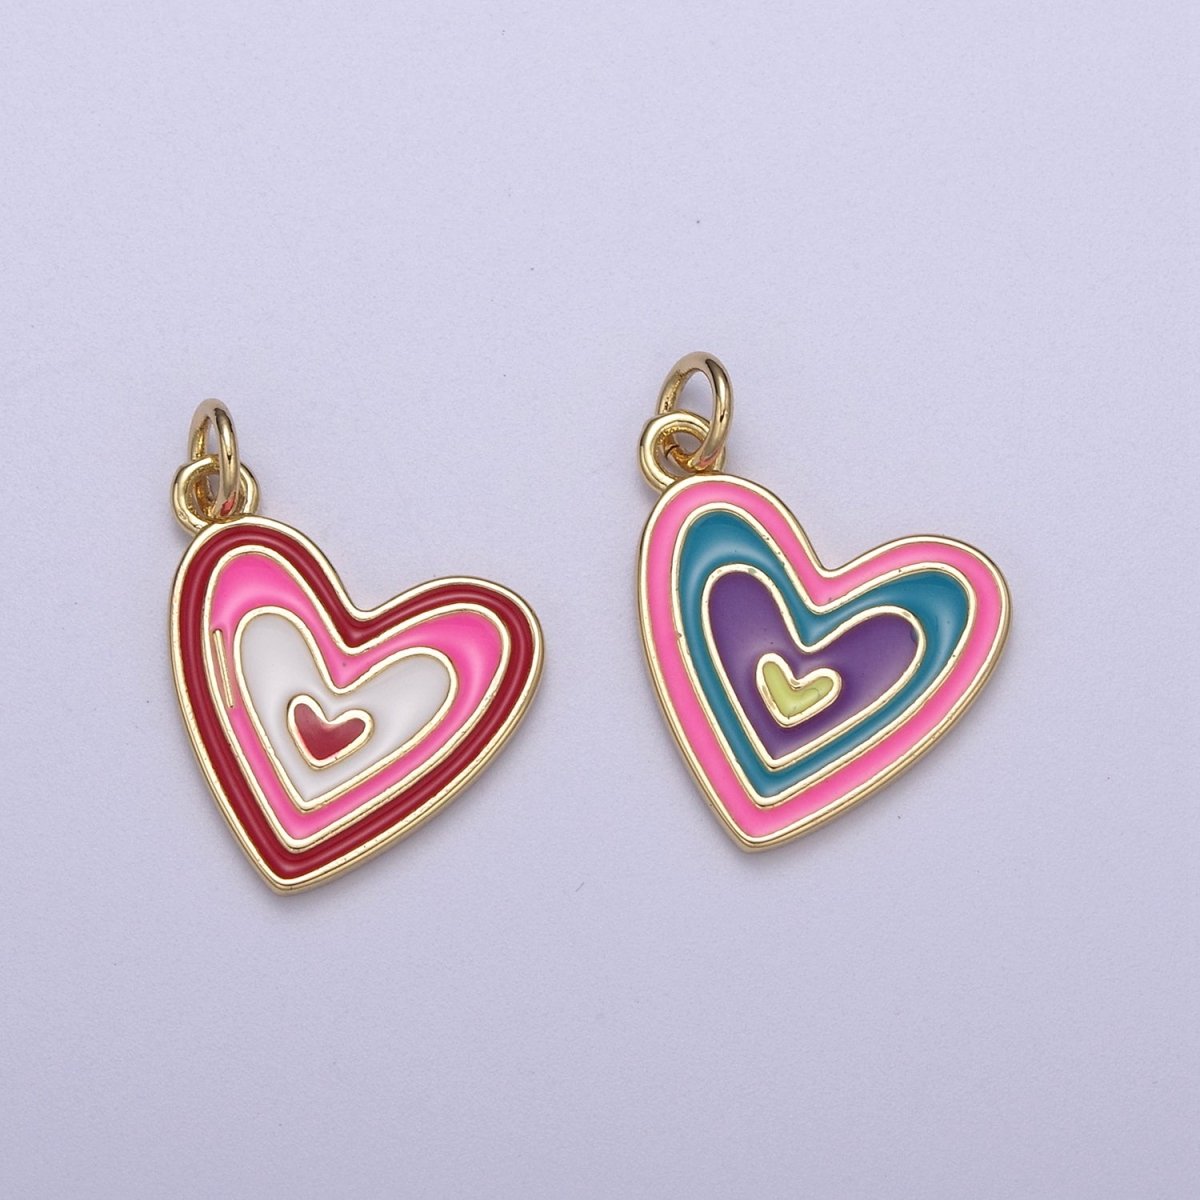 14k Gold Filled Pink Enamel Layer Heart Charm Add on Pendant Colorful Love Jewelry for Valentine Day N-304 N-305 - DLUXCA